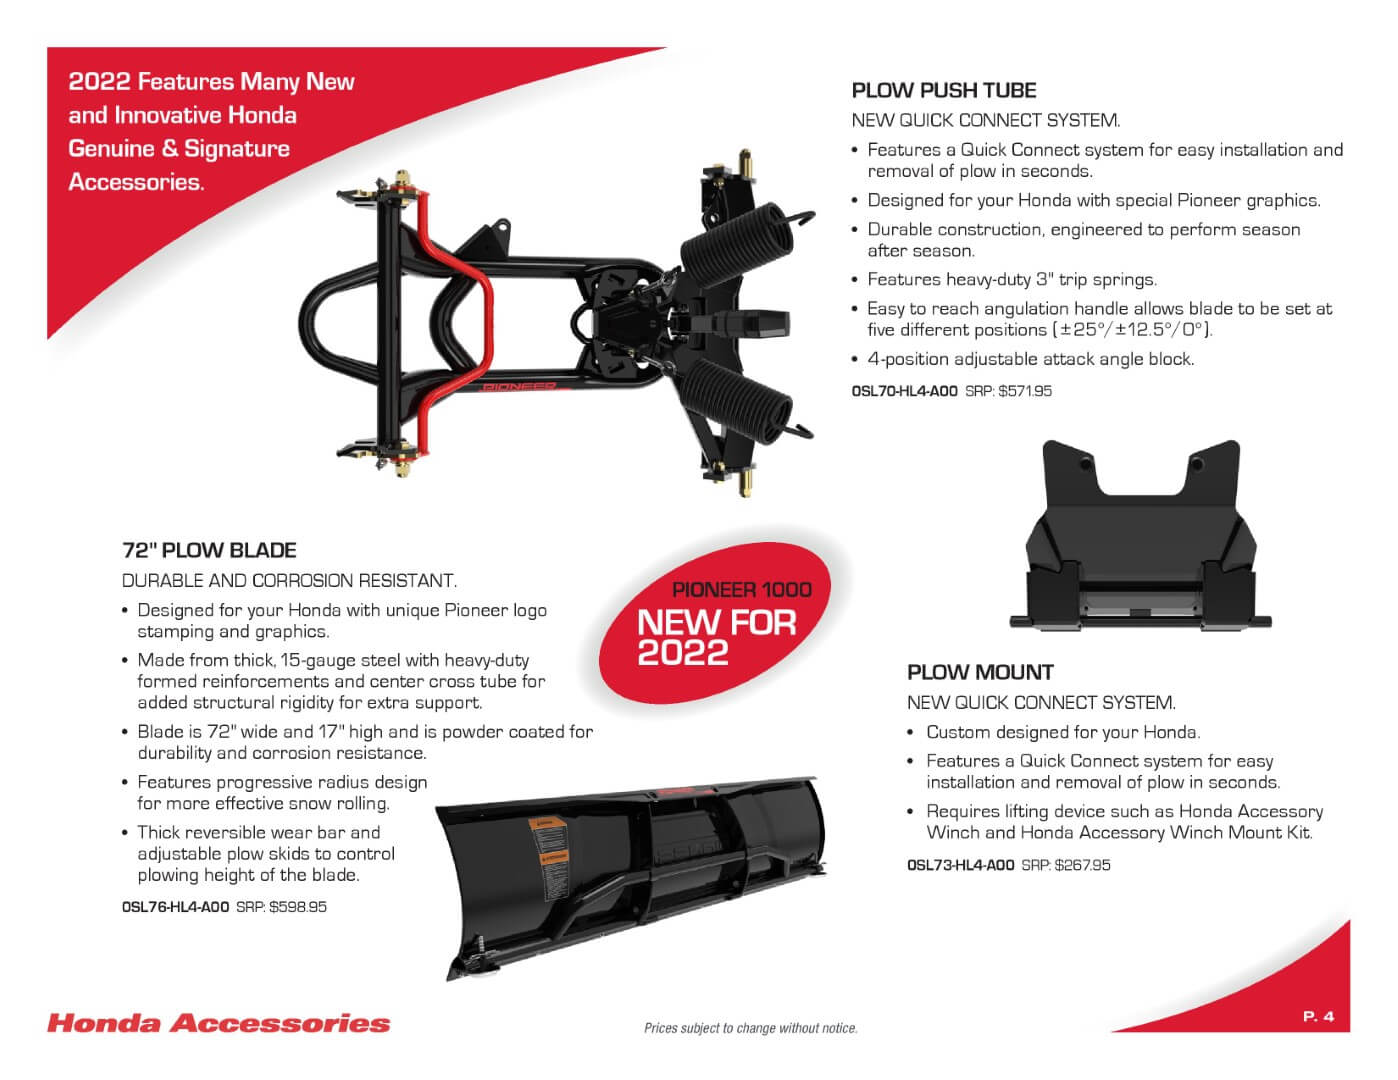 2022 Honda Pioneer 1000 Accessory Catalog / Accessories | Page 4 (including Pioneer 1000-5 Accessories)